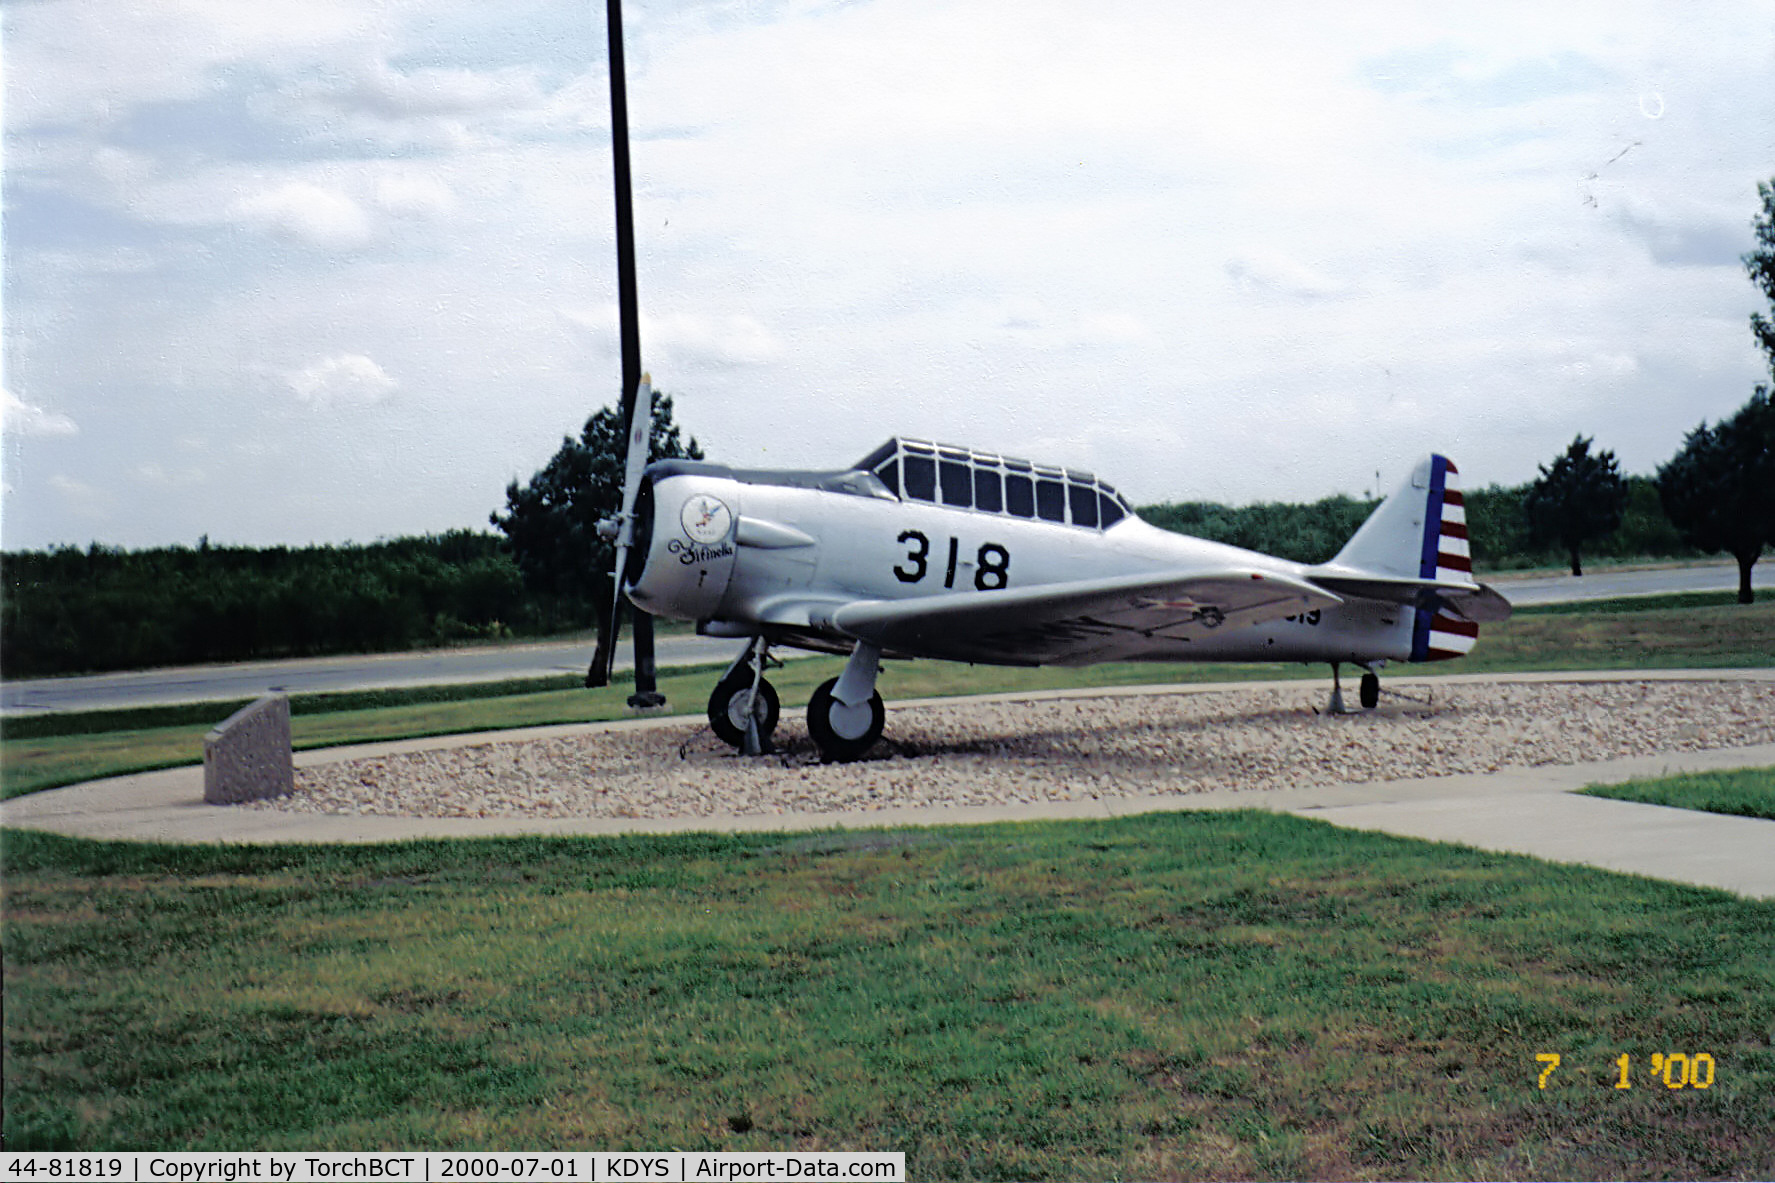 44-81819, 1944 North American AT-6F Texan C/N 121-42541, Texan on static at Dyess Linear Air Park